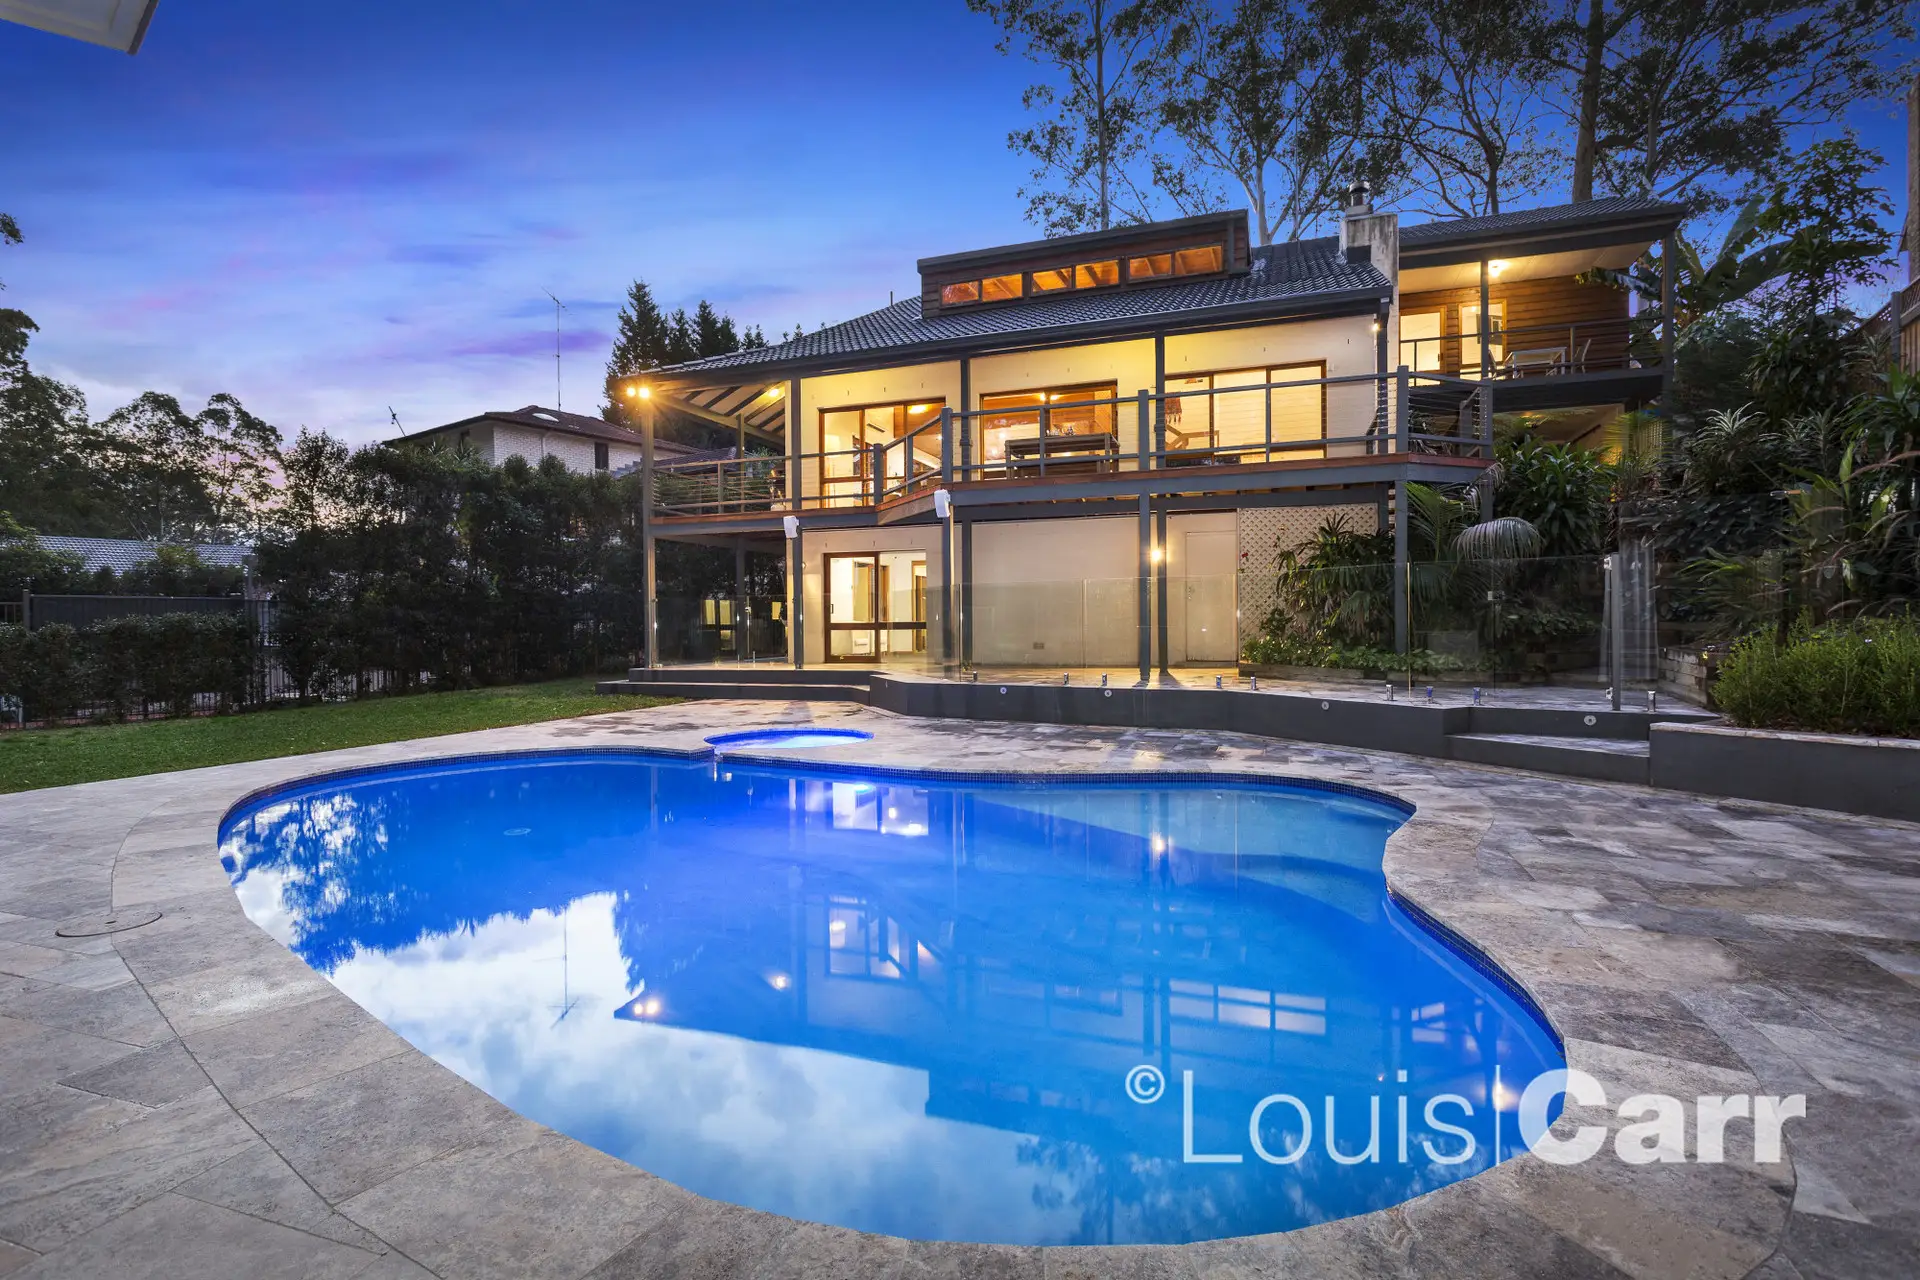 Photo #2: 98 Oratava Avenue, West Pennant Hills - Sold by Louis Carr Real Estate